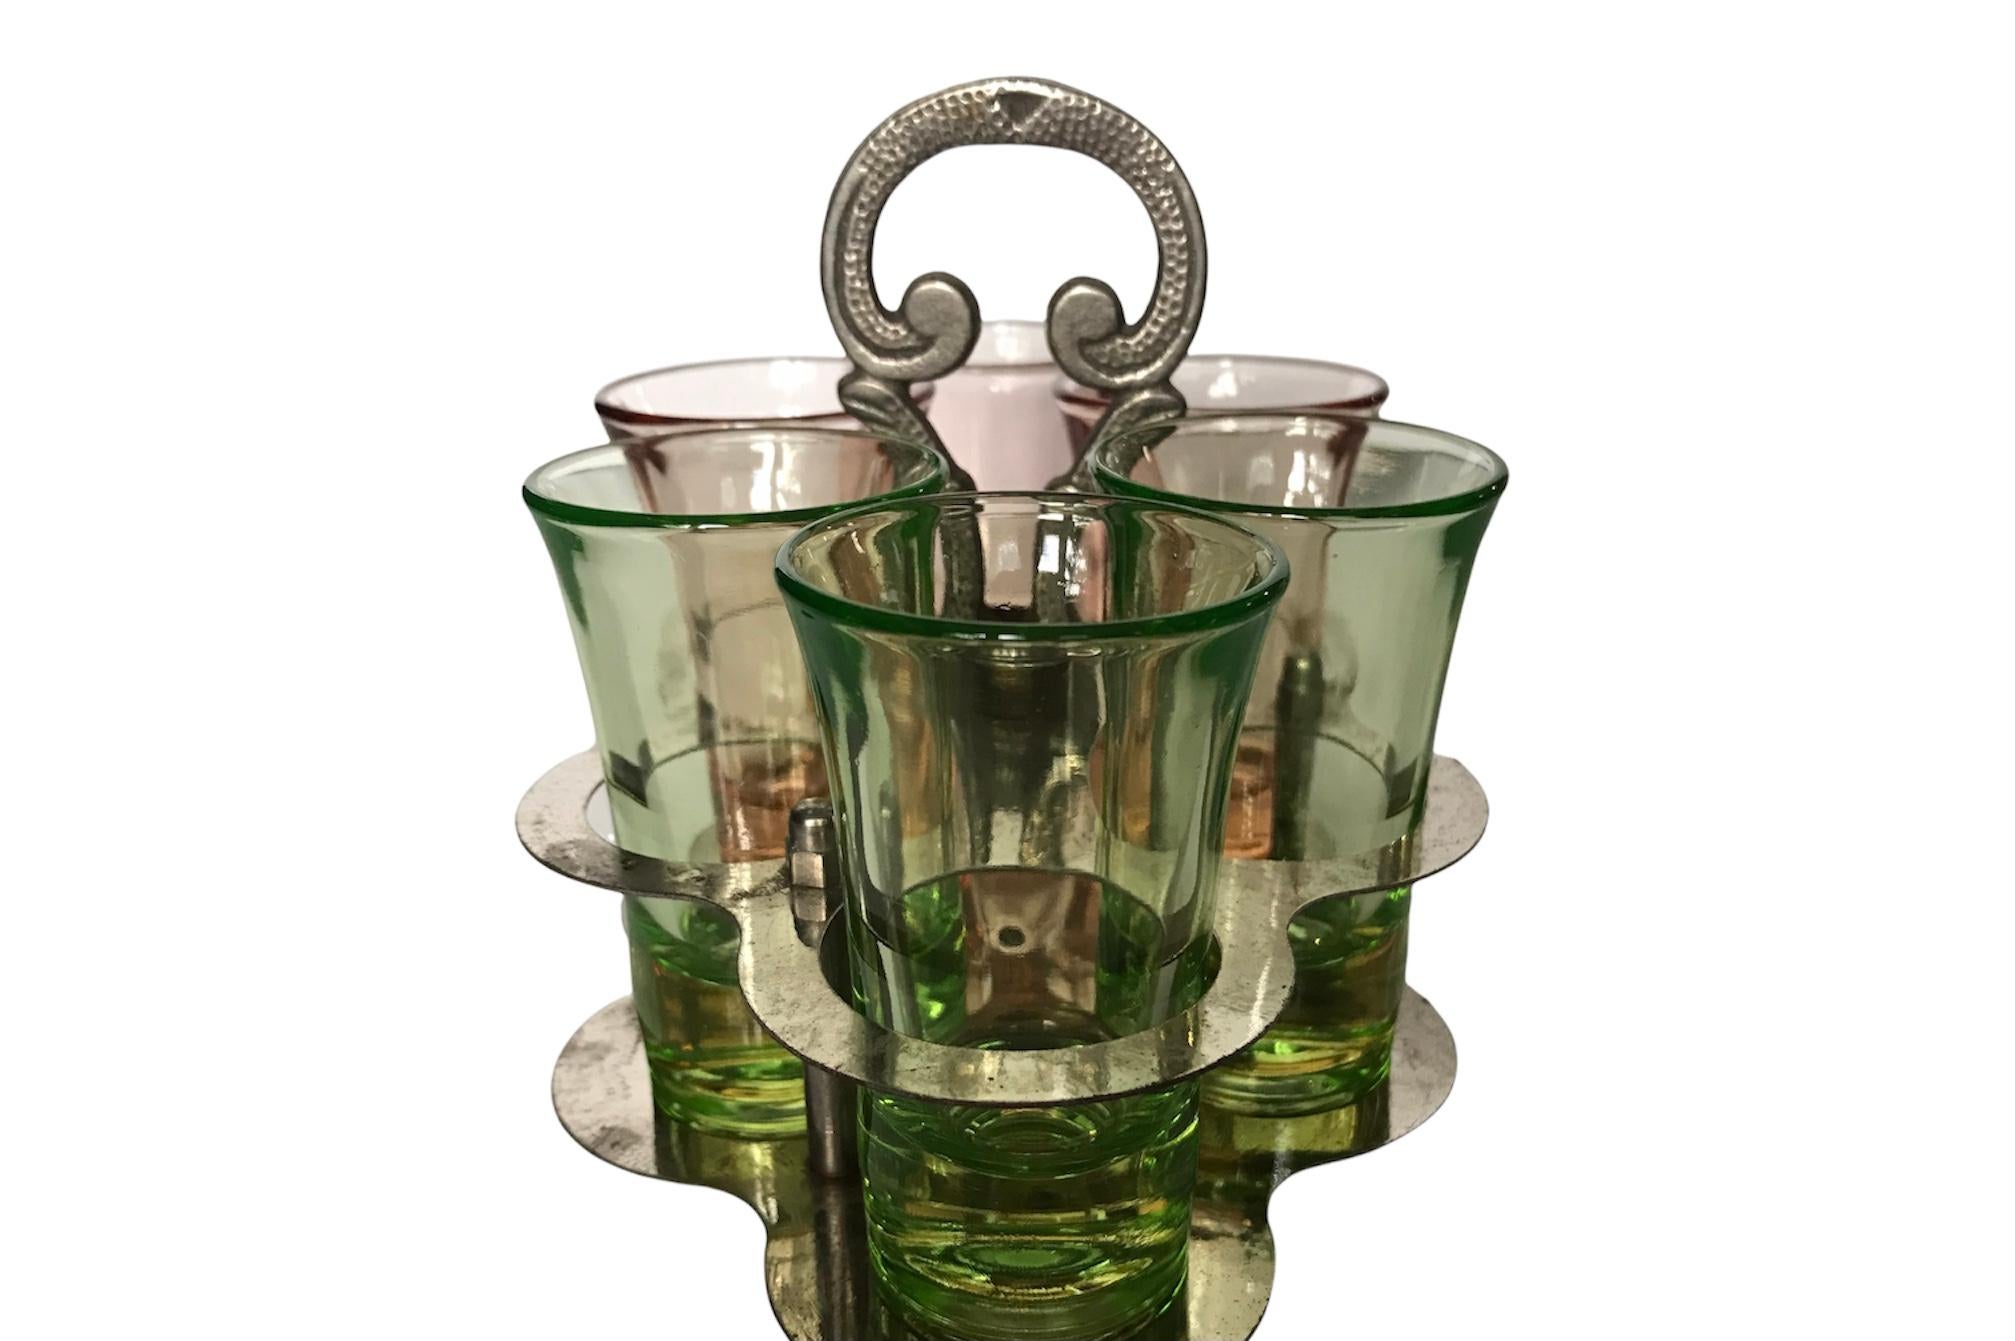 Rare find! such a unique set of cordial glasses kept in a silver-plated serving caddy. The silver-plated caddy offers a 6-hole holding station for the cordial glasses (3 pink and 3 green) with a handle that models a hand-hammered technique design.